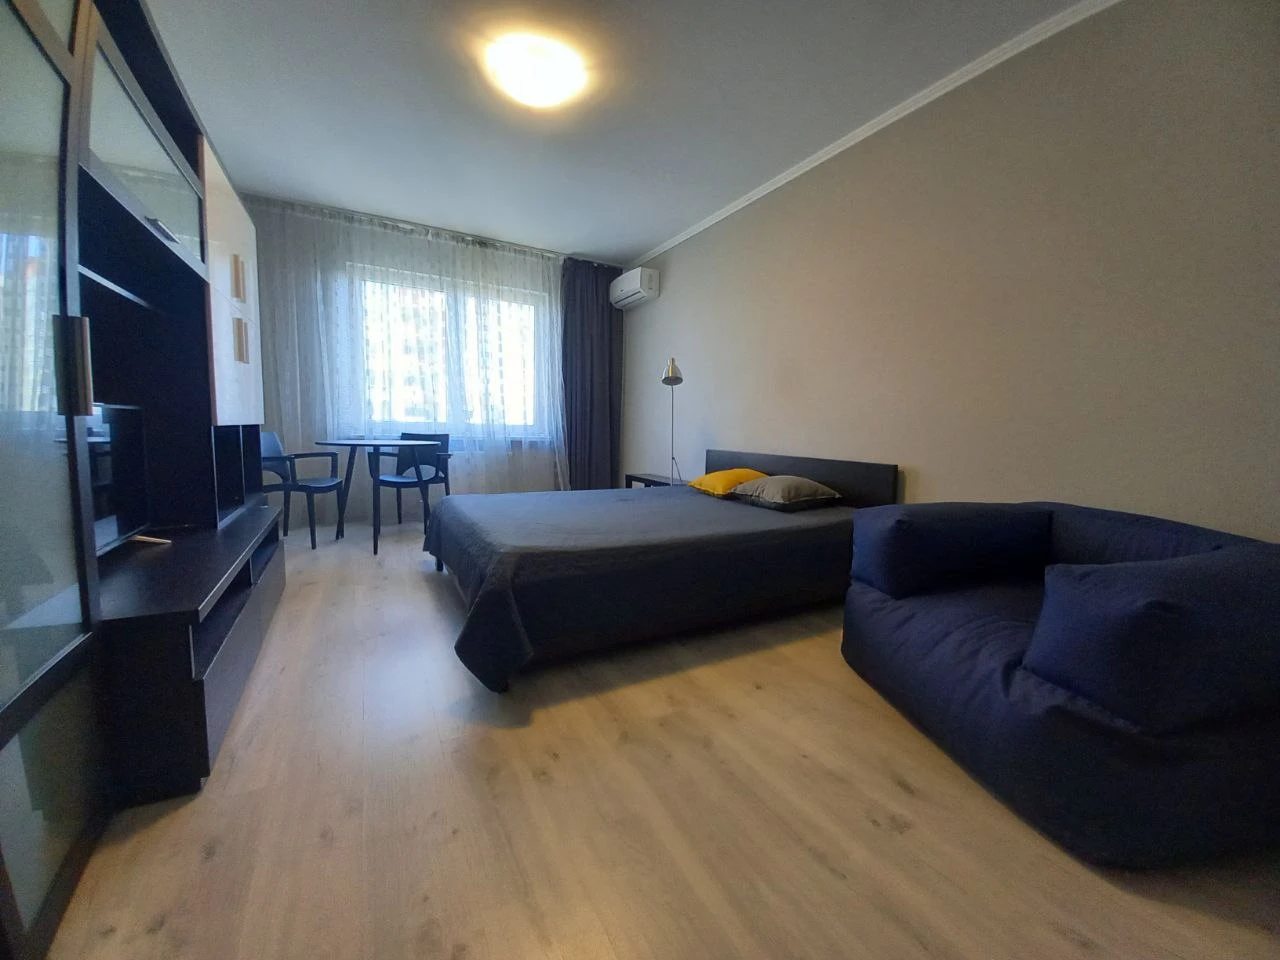 Apartment for rent. 1 room, 43 m², 21 floor/25 floors. 2, Doncya Mihayla 2, Kyiv. 